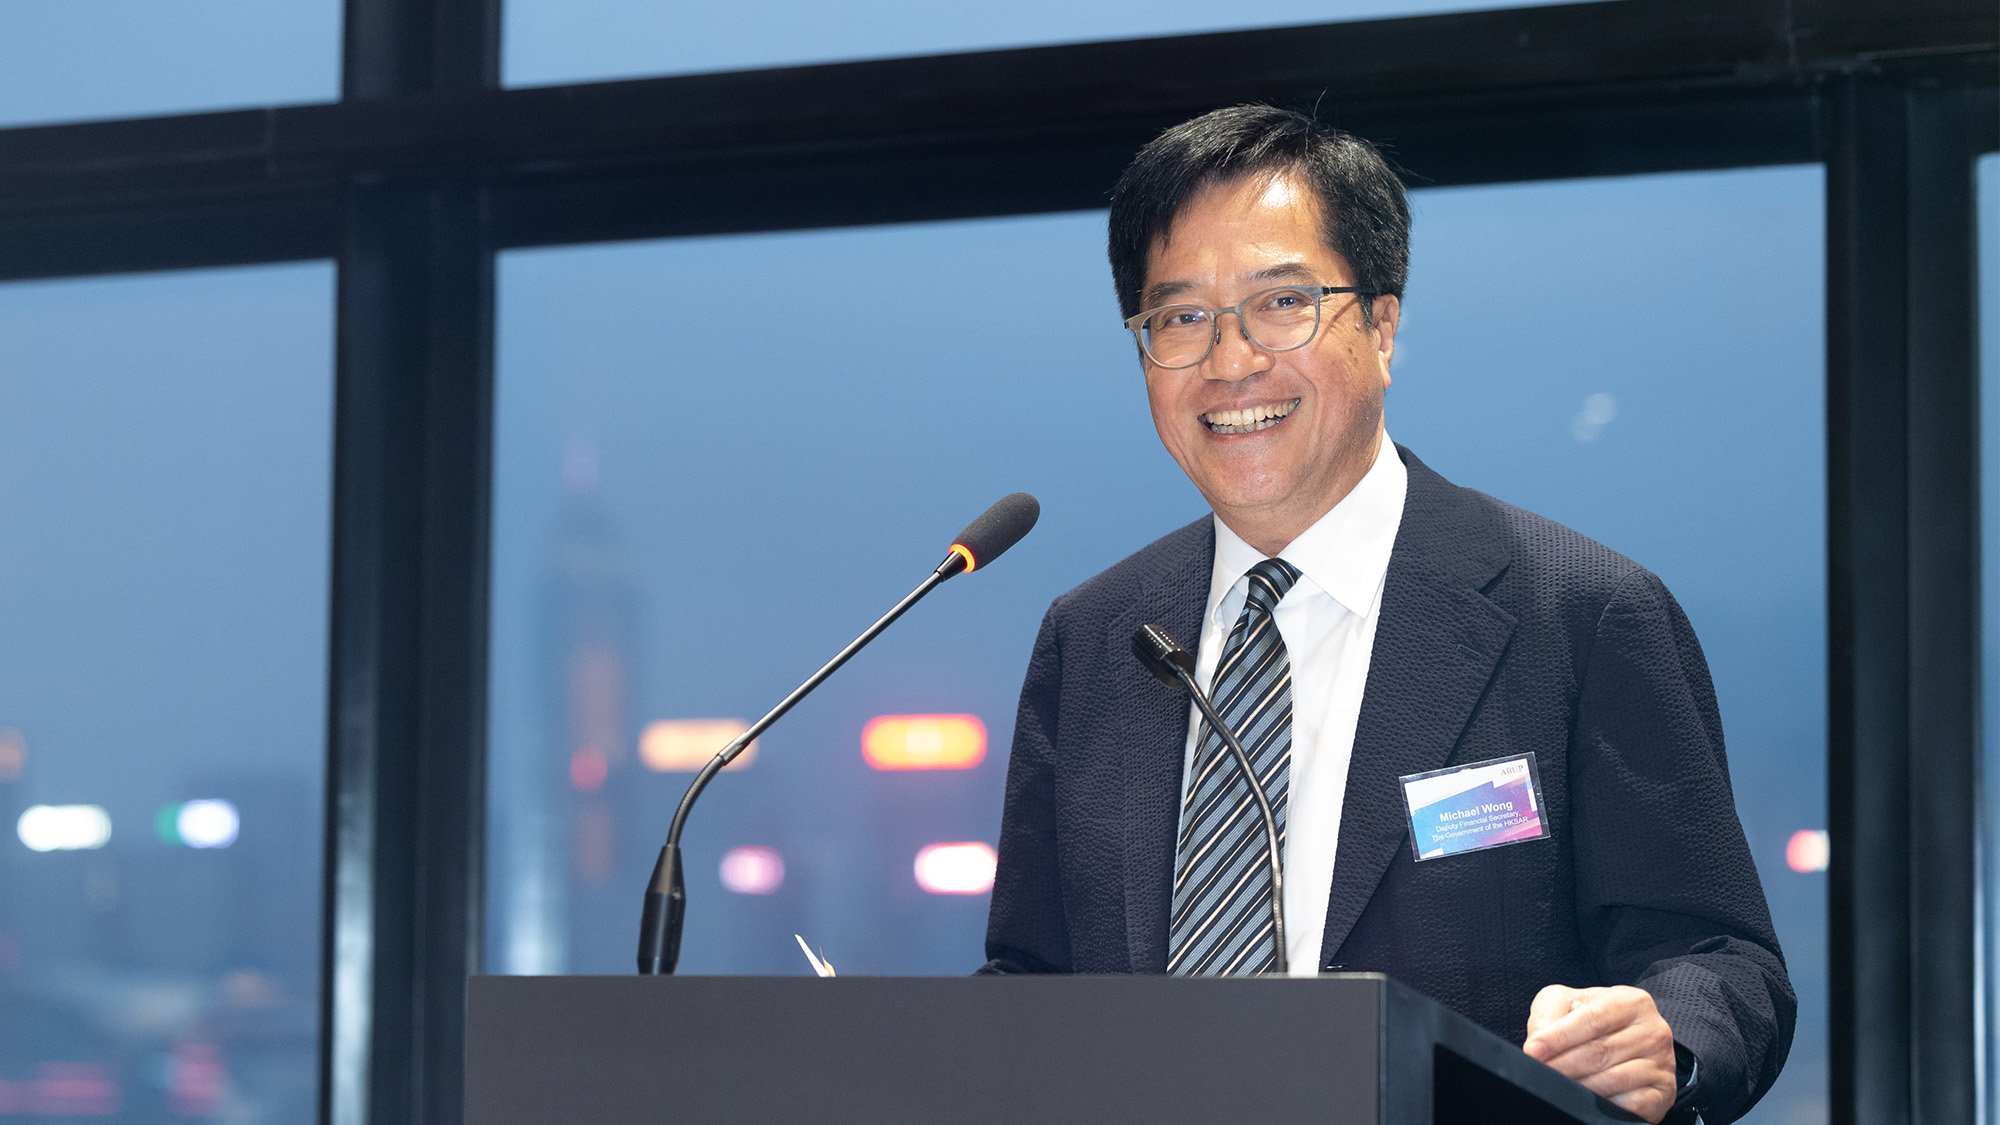 The Deputy Financial Secretary of the Hong Kong SAR Government, Michael Wong, served as the Guest of Honour at the event.